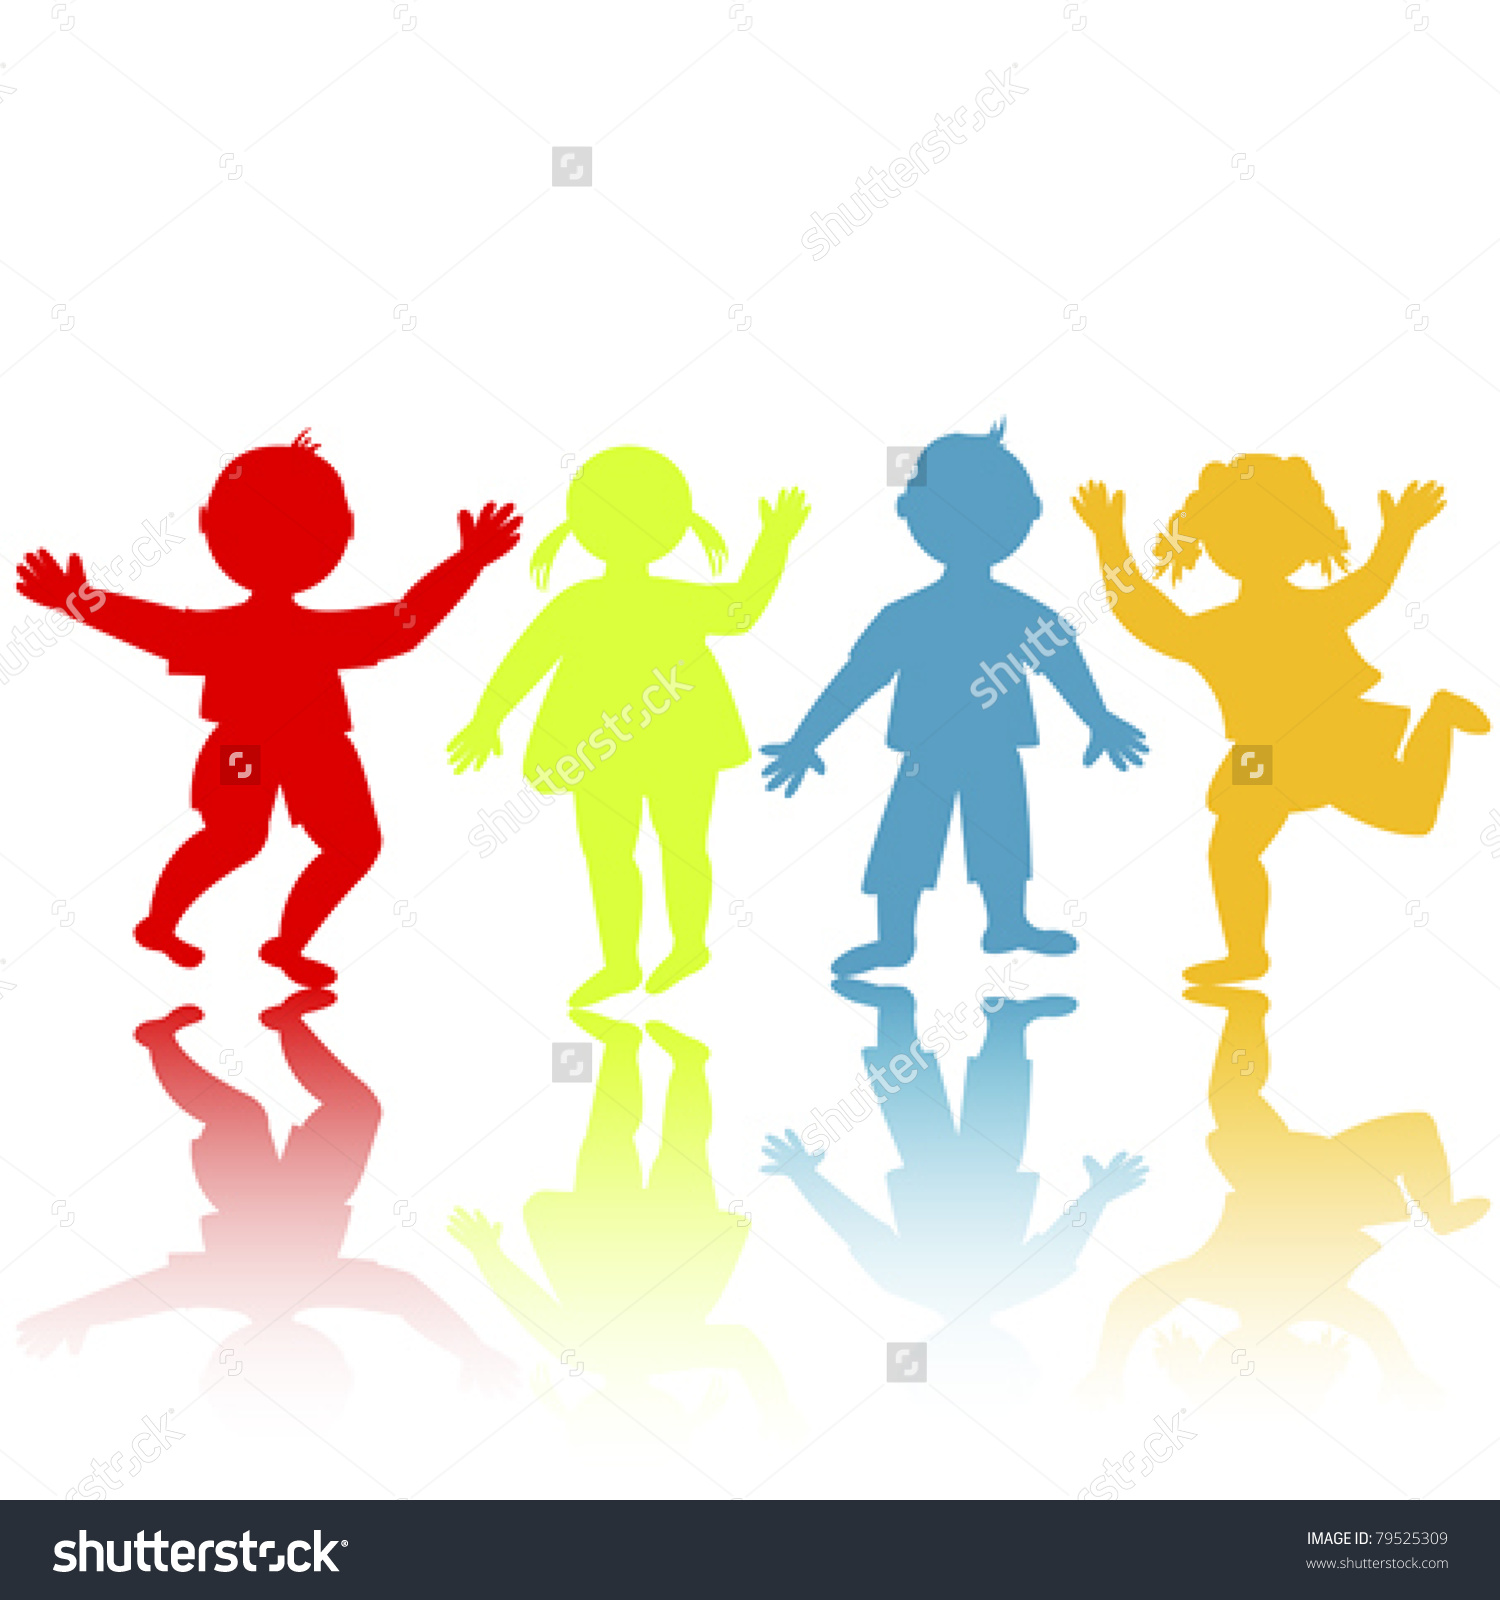 Colored Children Silhouettes Playing Stock Vector 79525309.